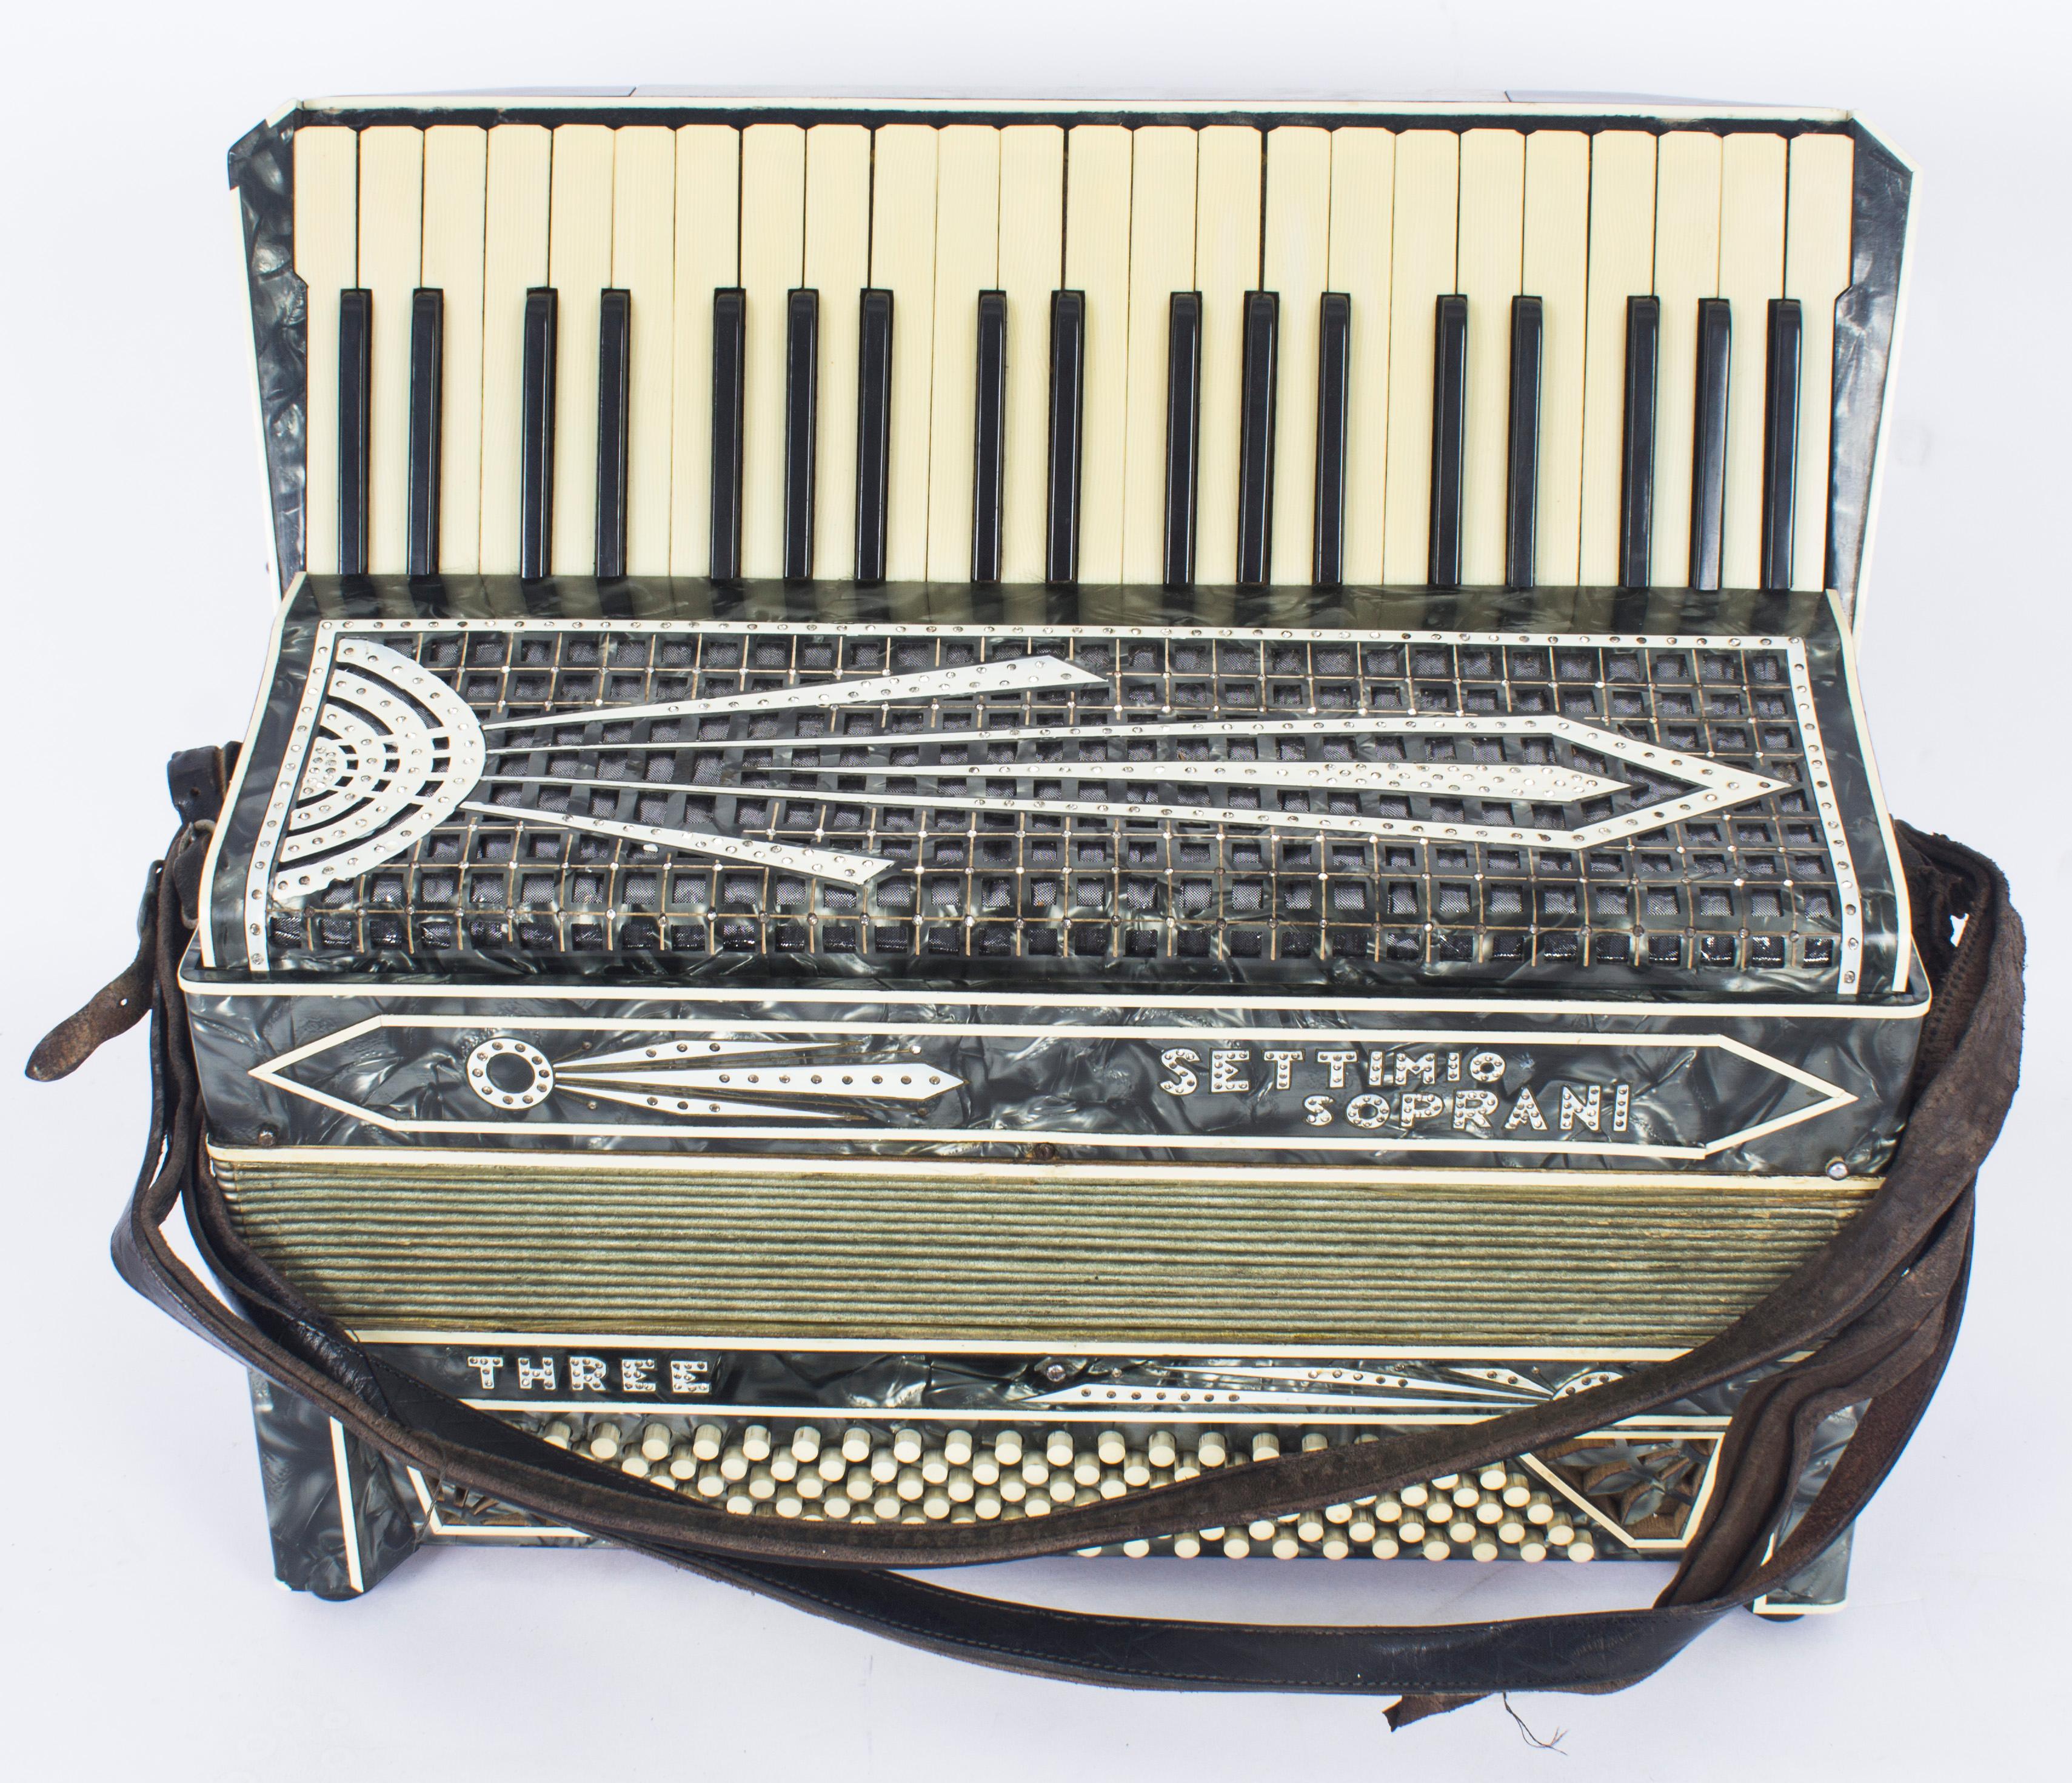 This is a fabulous Settimio Soprani III gray pearl accordion

Condition:
A superb decorative item.

Dimensions in cm:
Height 41 x width 48 x depth 22

Dimensions in inches:
Height 16.1 x width 18.9 x depth 8.7

Piano accordion is an accordion